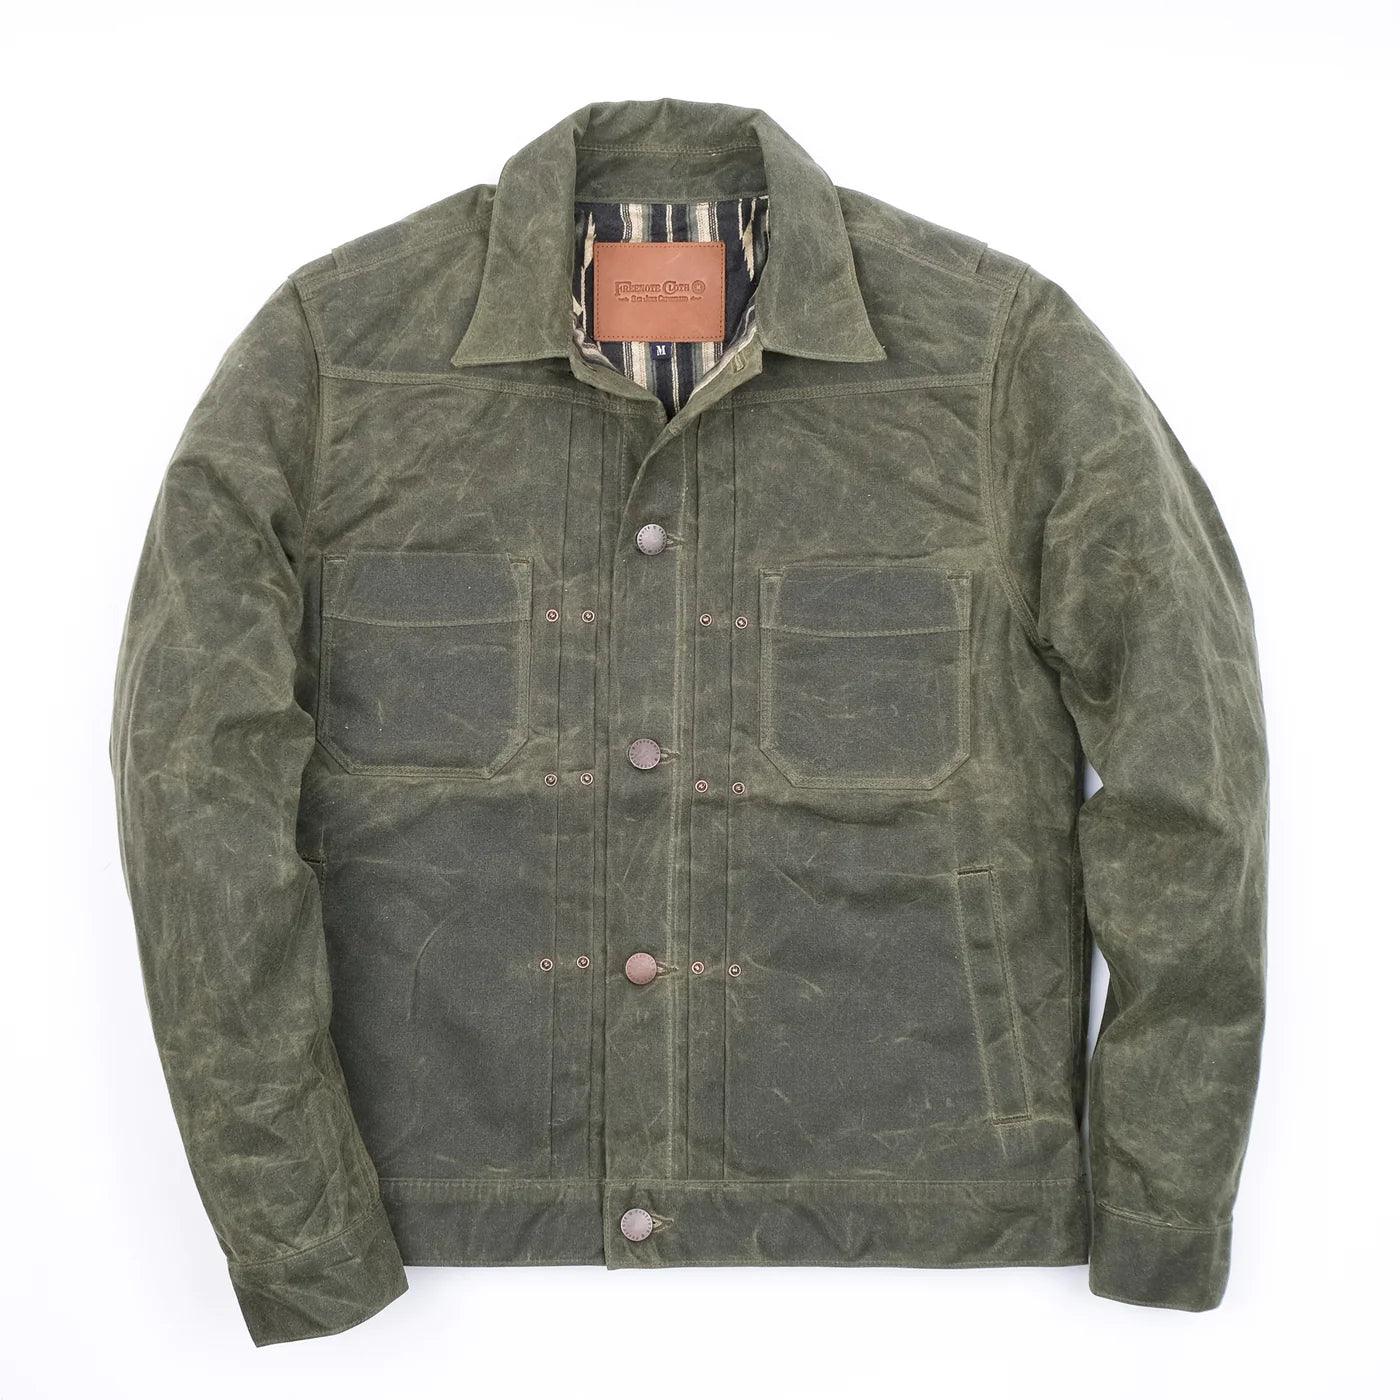 Freenote Cloth RJ-1 Riders Jacket Waxed Canvas - Olive - Guilty Party